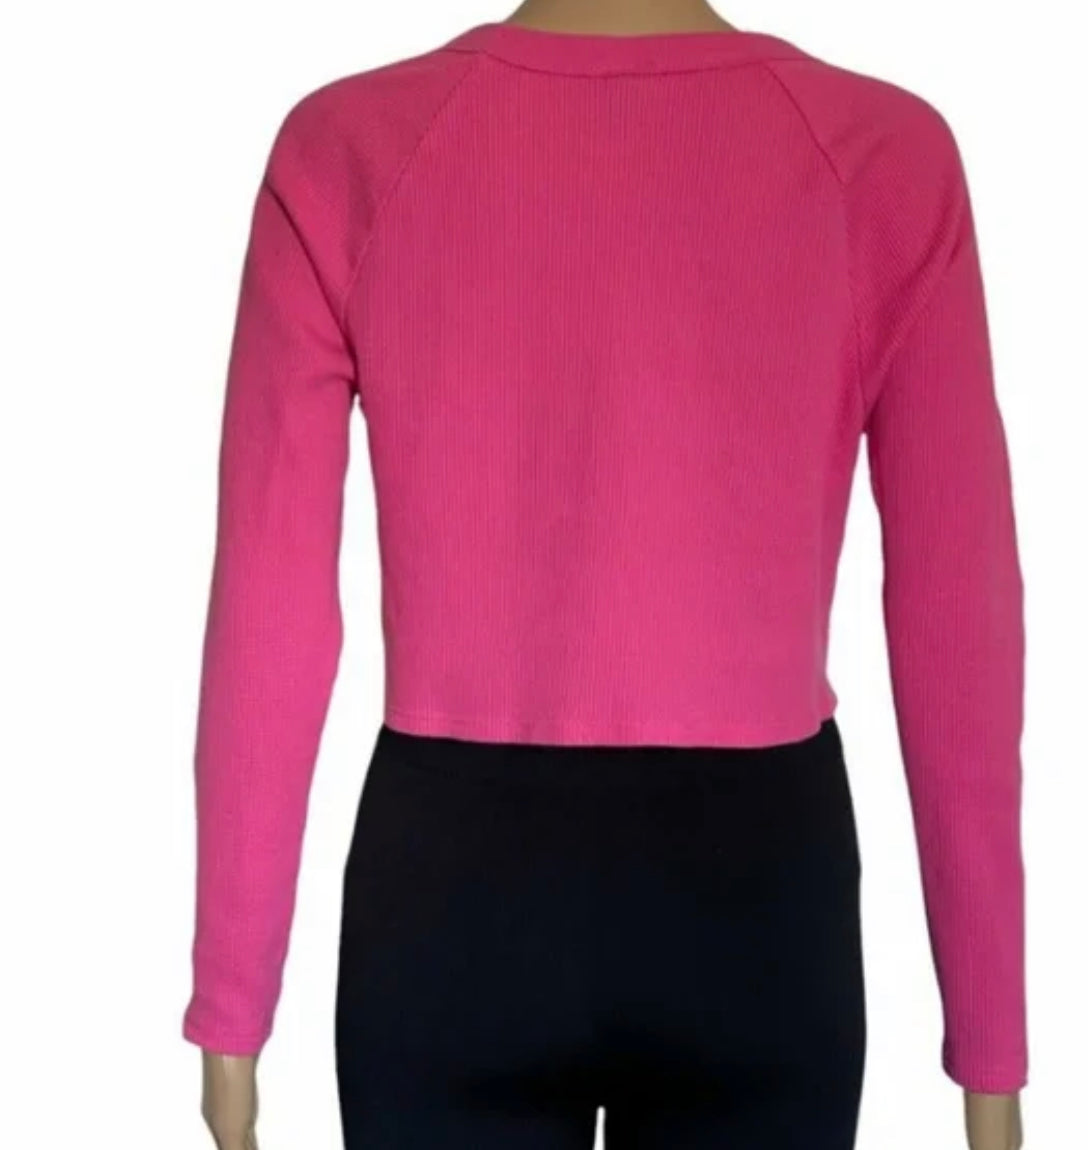 WILD FABLE Sweetheart Cutout Long Sleeve Ribbed Knit Bodysuit Pink